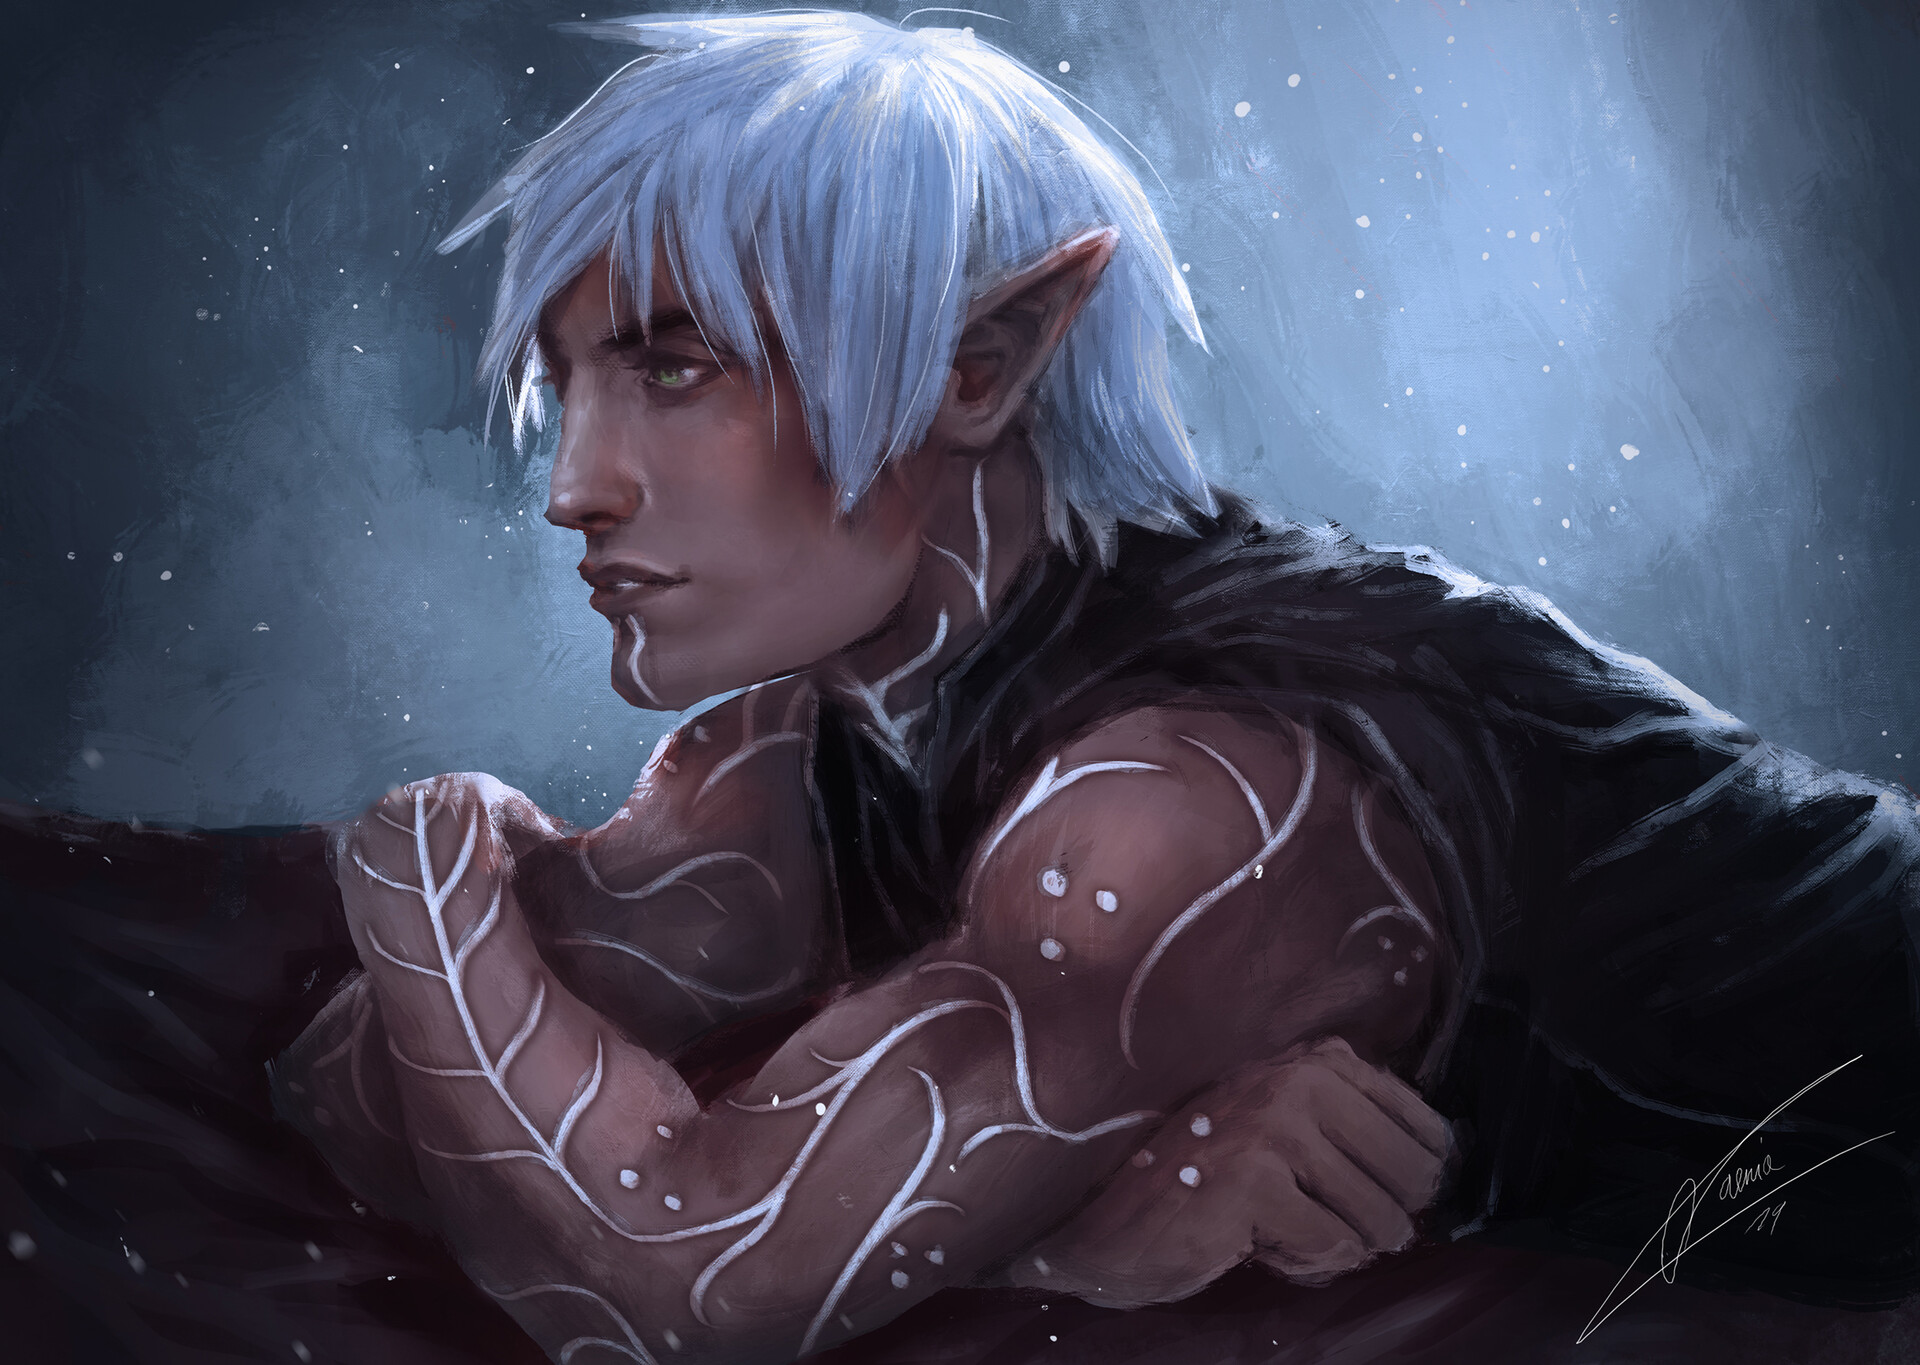 Study that turned into a fanart of Fenris from Dragon Age 2.